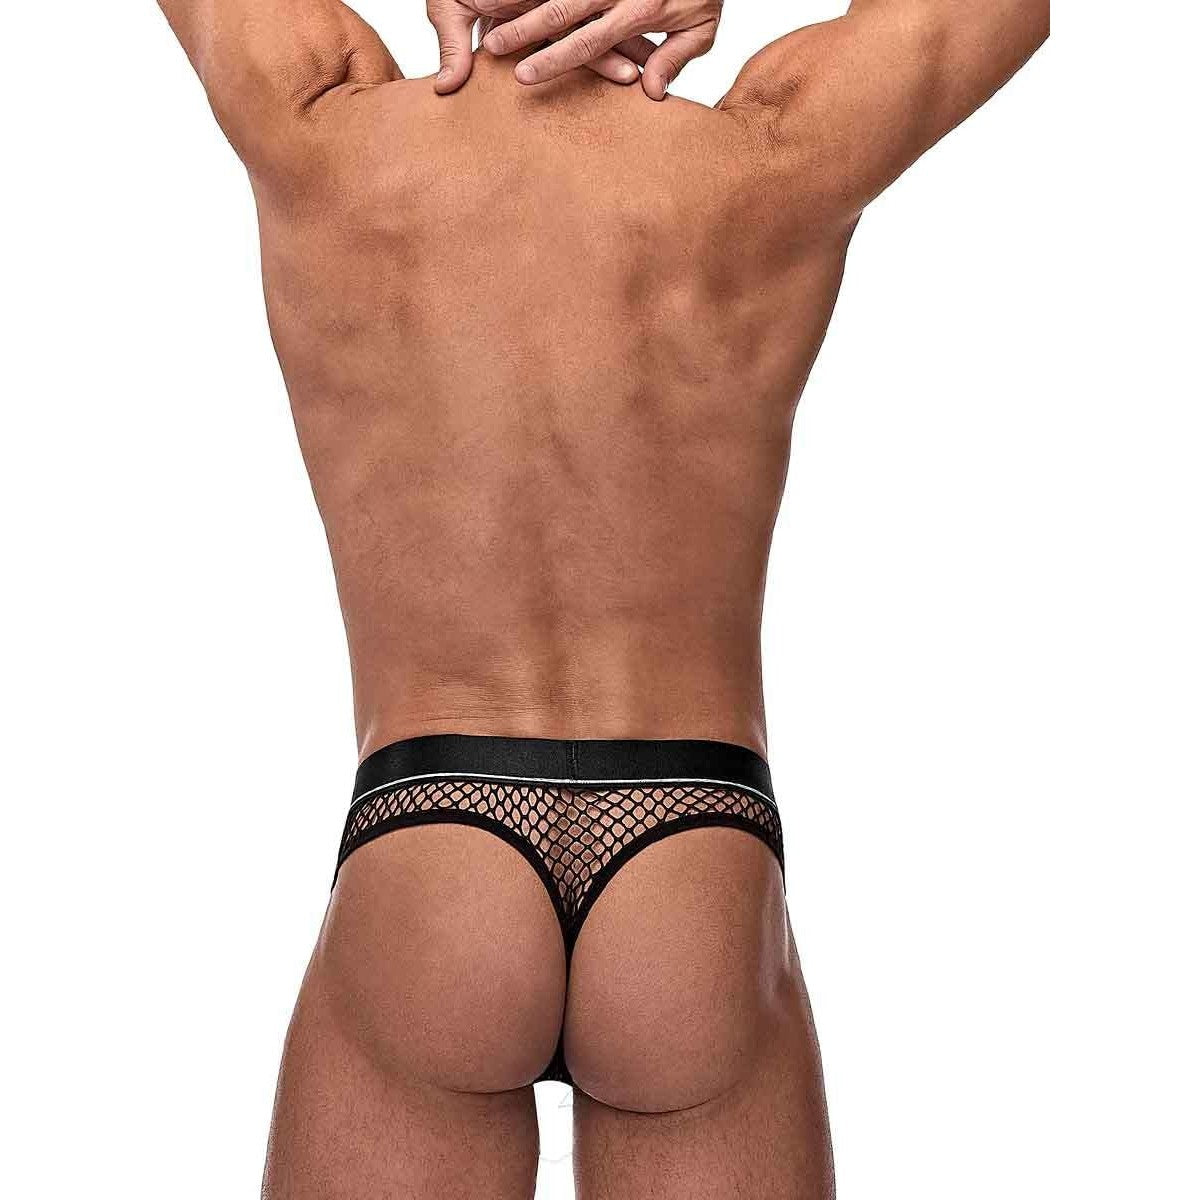 Cock Pit Cock Ring Thong Black L-xl Intimates Adult Boutique